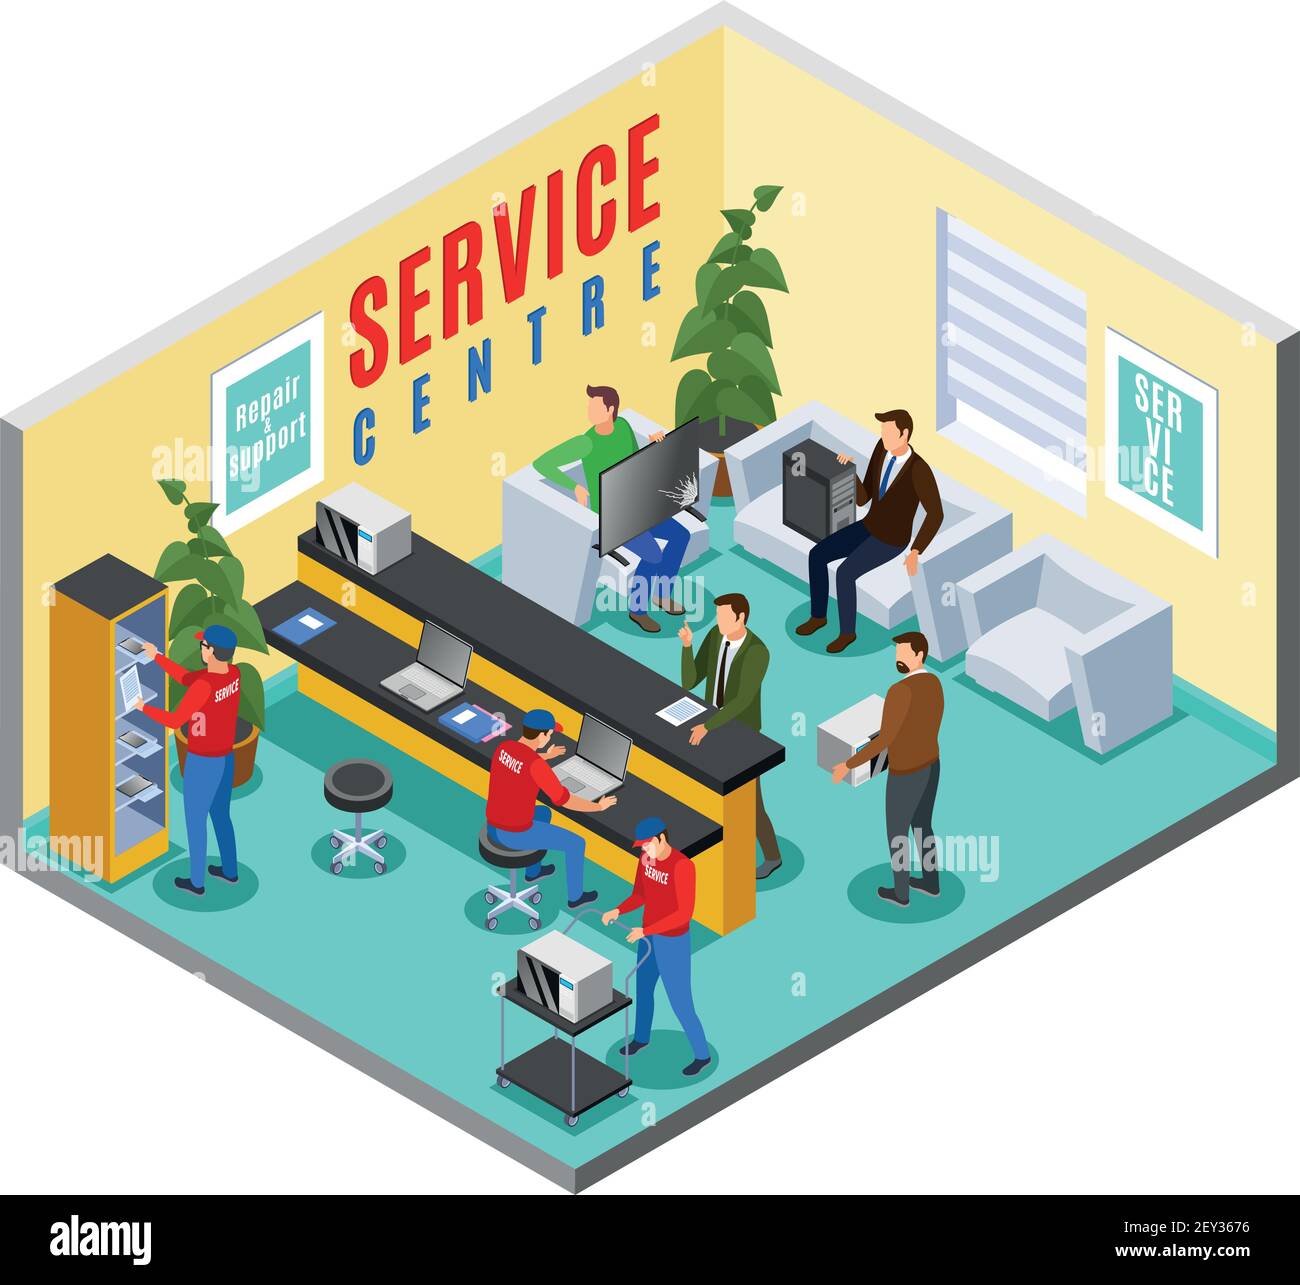 Service centre isometric indoor composition with office interior of repair shop reception area with human characters vector illustration Stock Vector